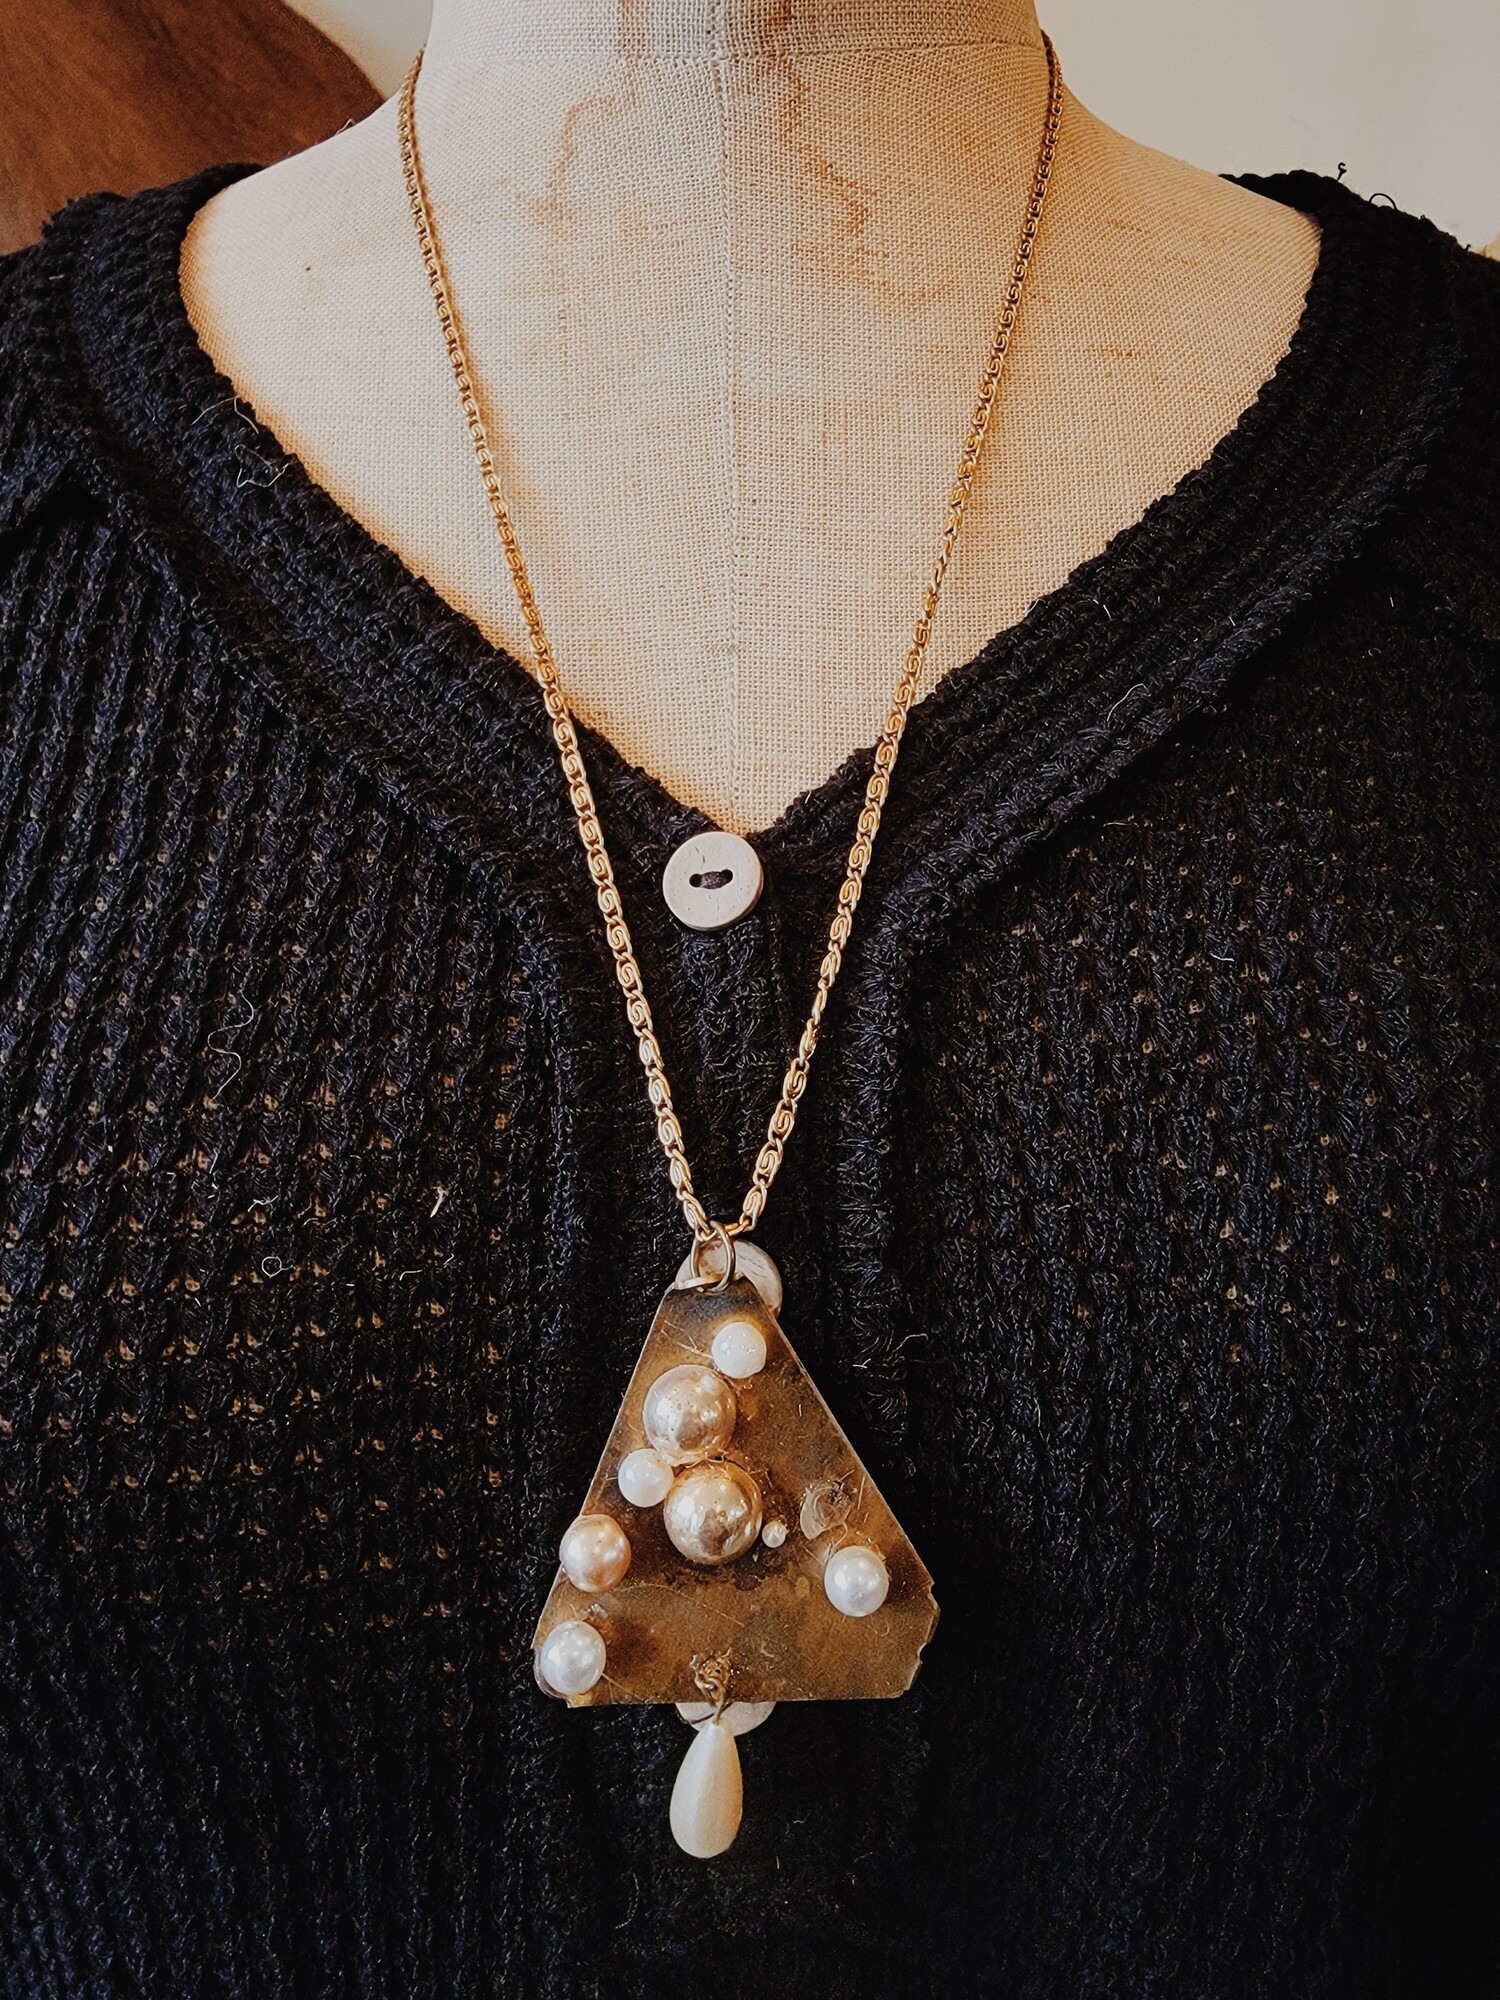 This handmade necklace has an antique brass triangle as its pendant with an assortment of faux pearls! It is on a 26 inch chain.